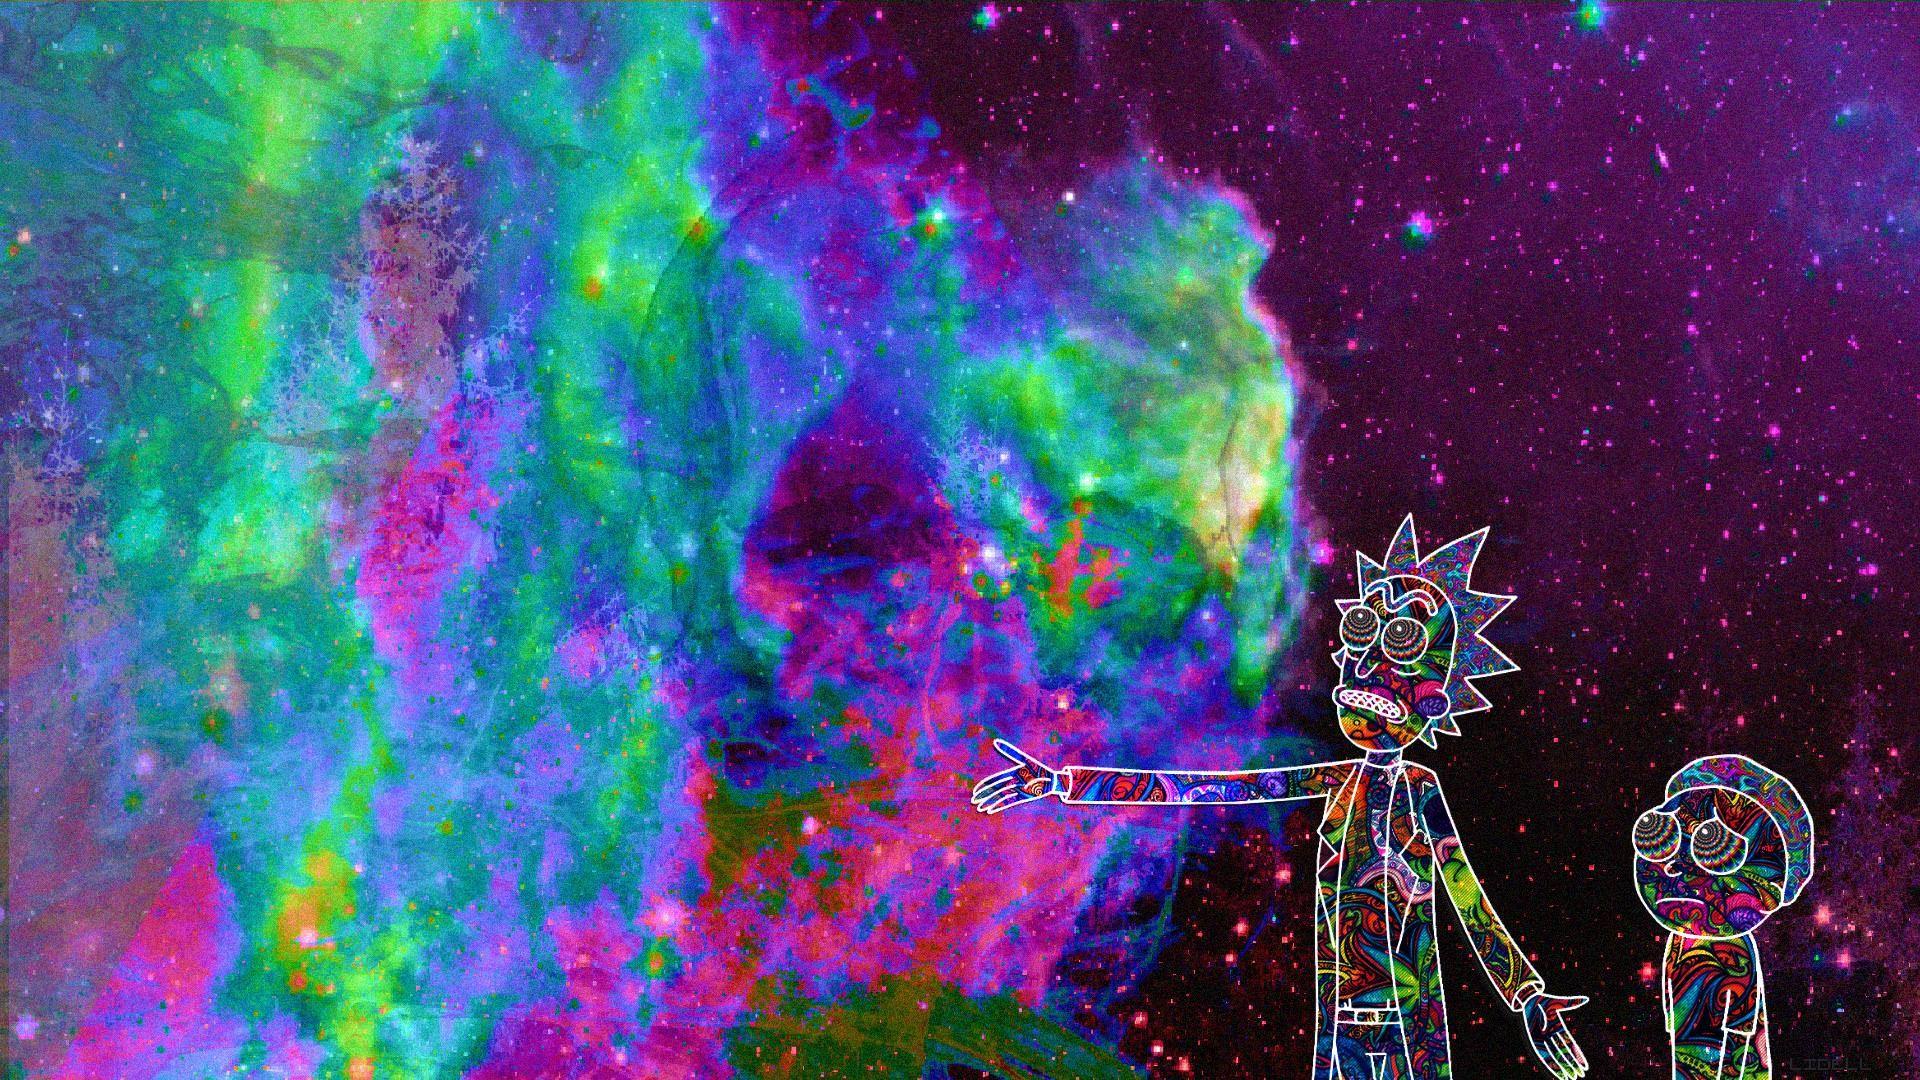 Steam WorkshopTrippy Rick and Morty Wallpaper Sound Reactive